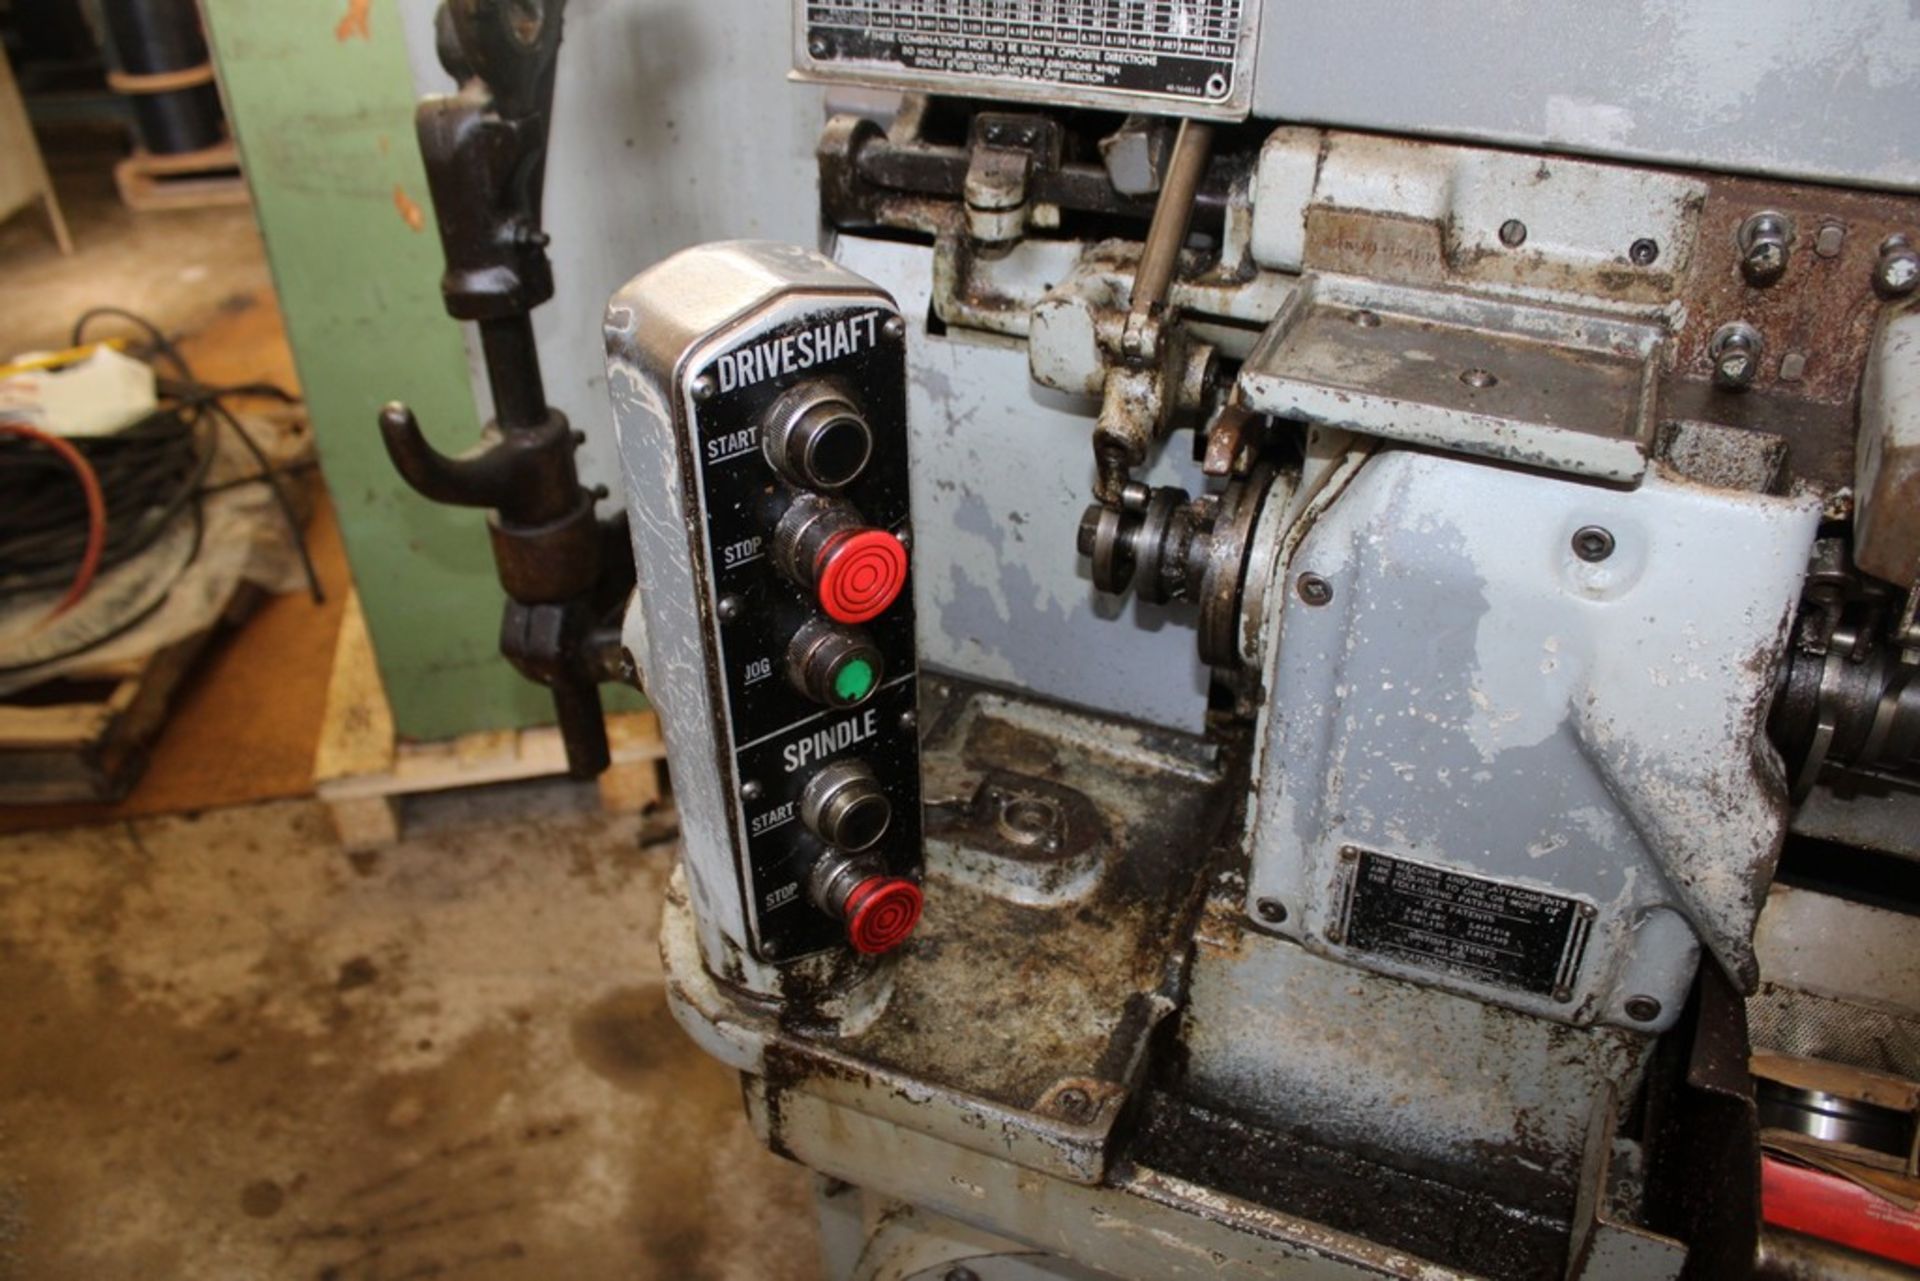 BROWN & SHARPE 1/2" NO. 00 PUSH BUTTON AUTOMATIC SCREW MACHINE, S/N 542-00-6489, WITH VERTICAL - Image 2 of 4